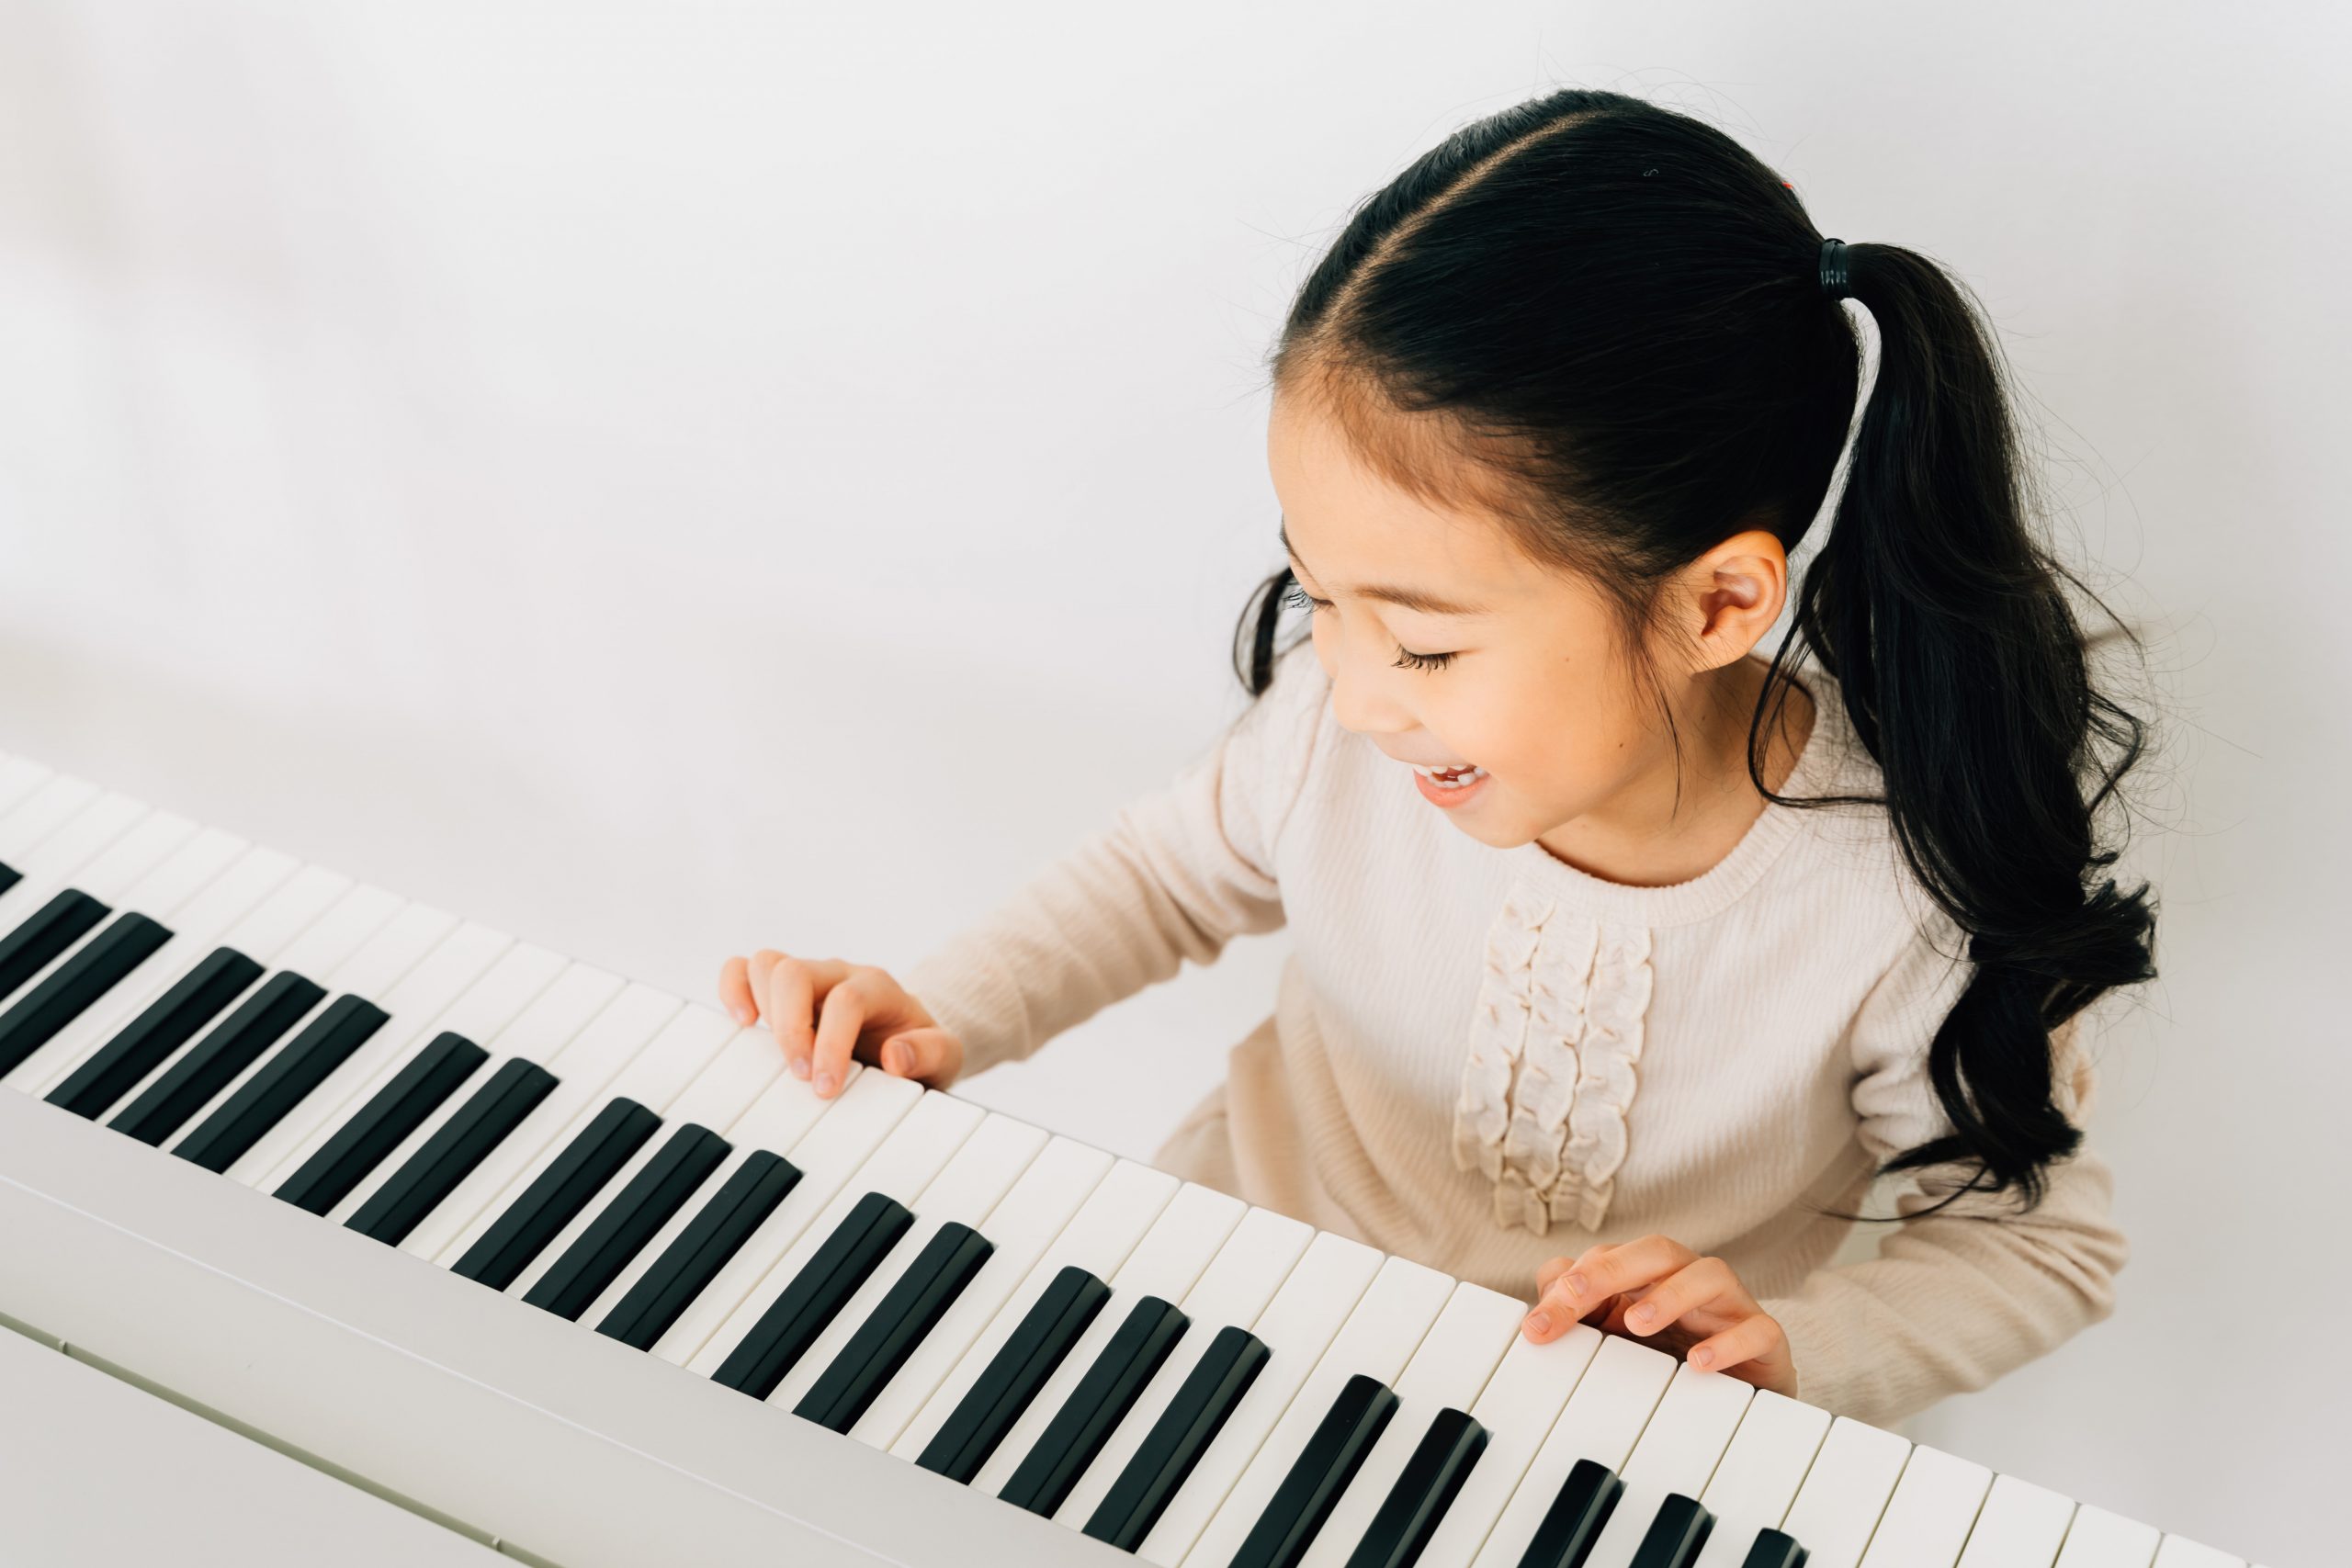 From above of happy smiling cute Asian girl playing piano enjoying time practicing music at home